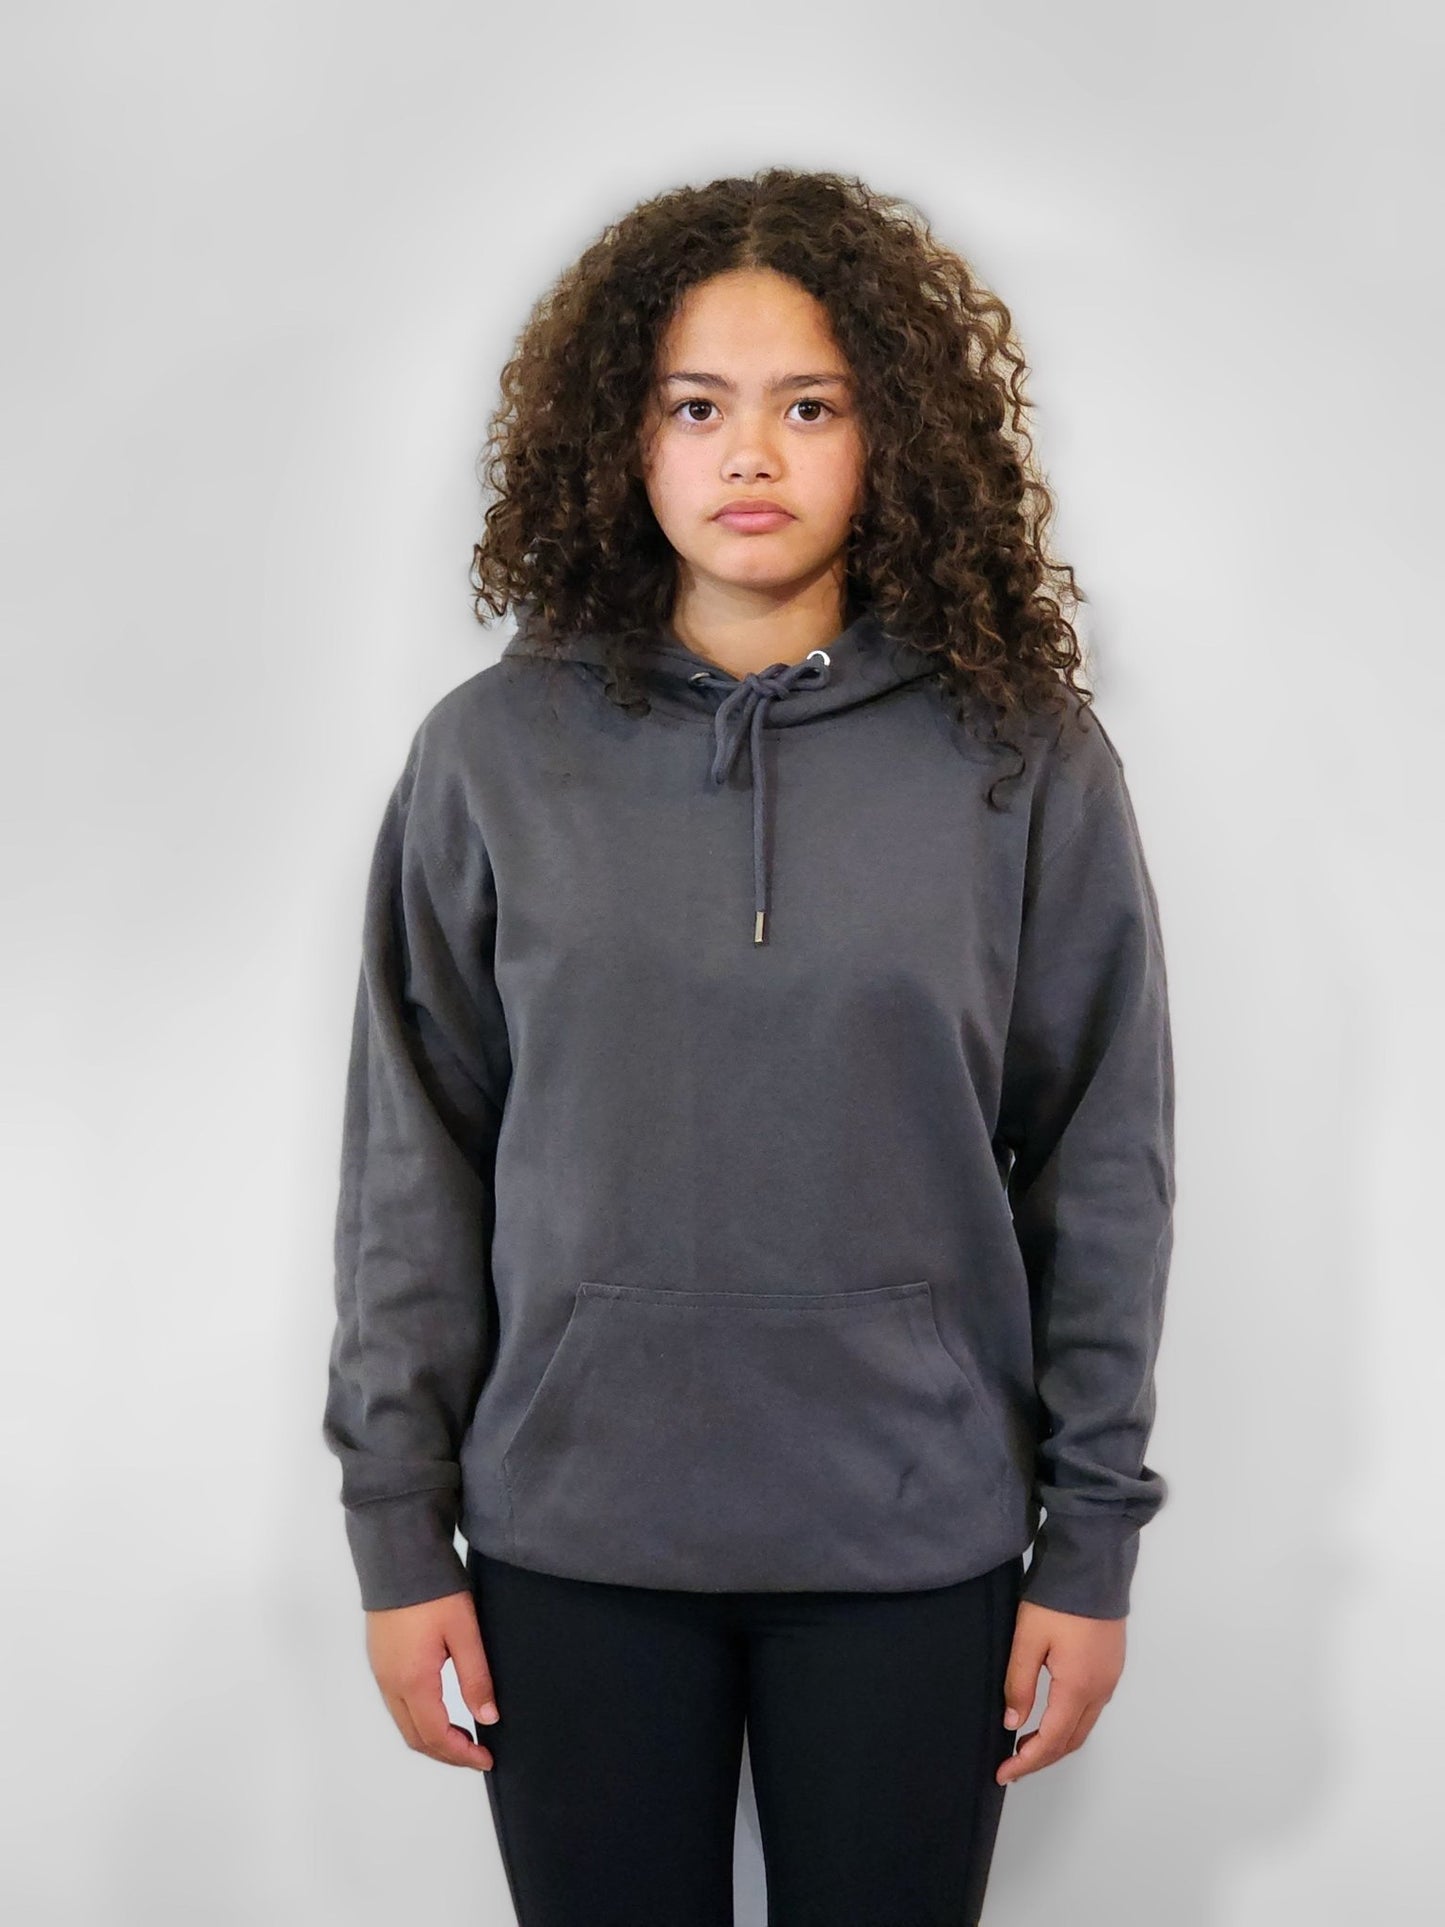 Style - Charcoal Hoodie - Highway 26 Clothing